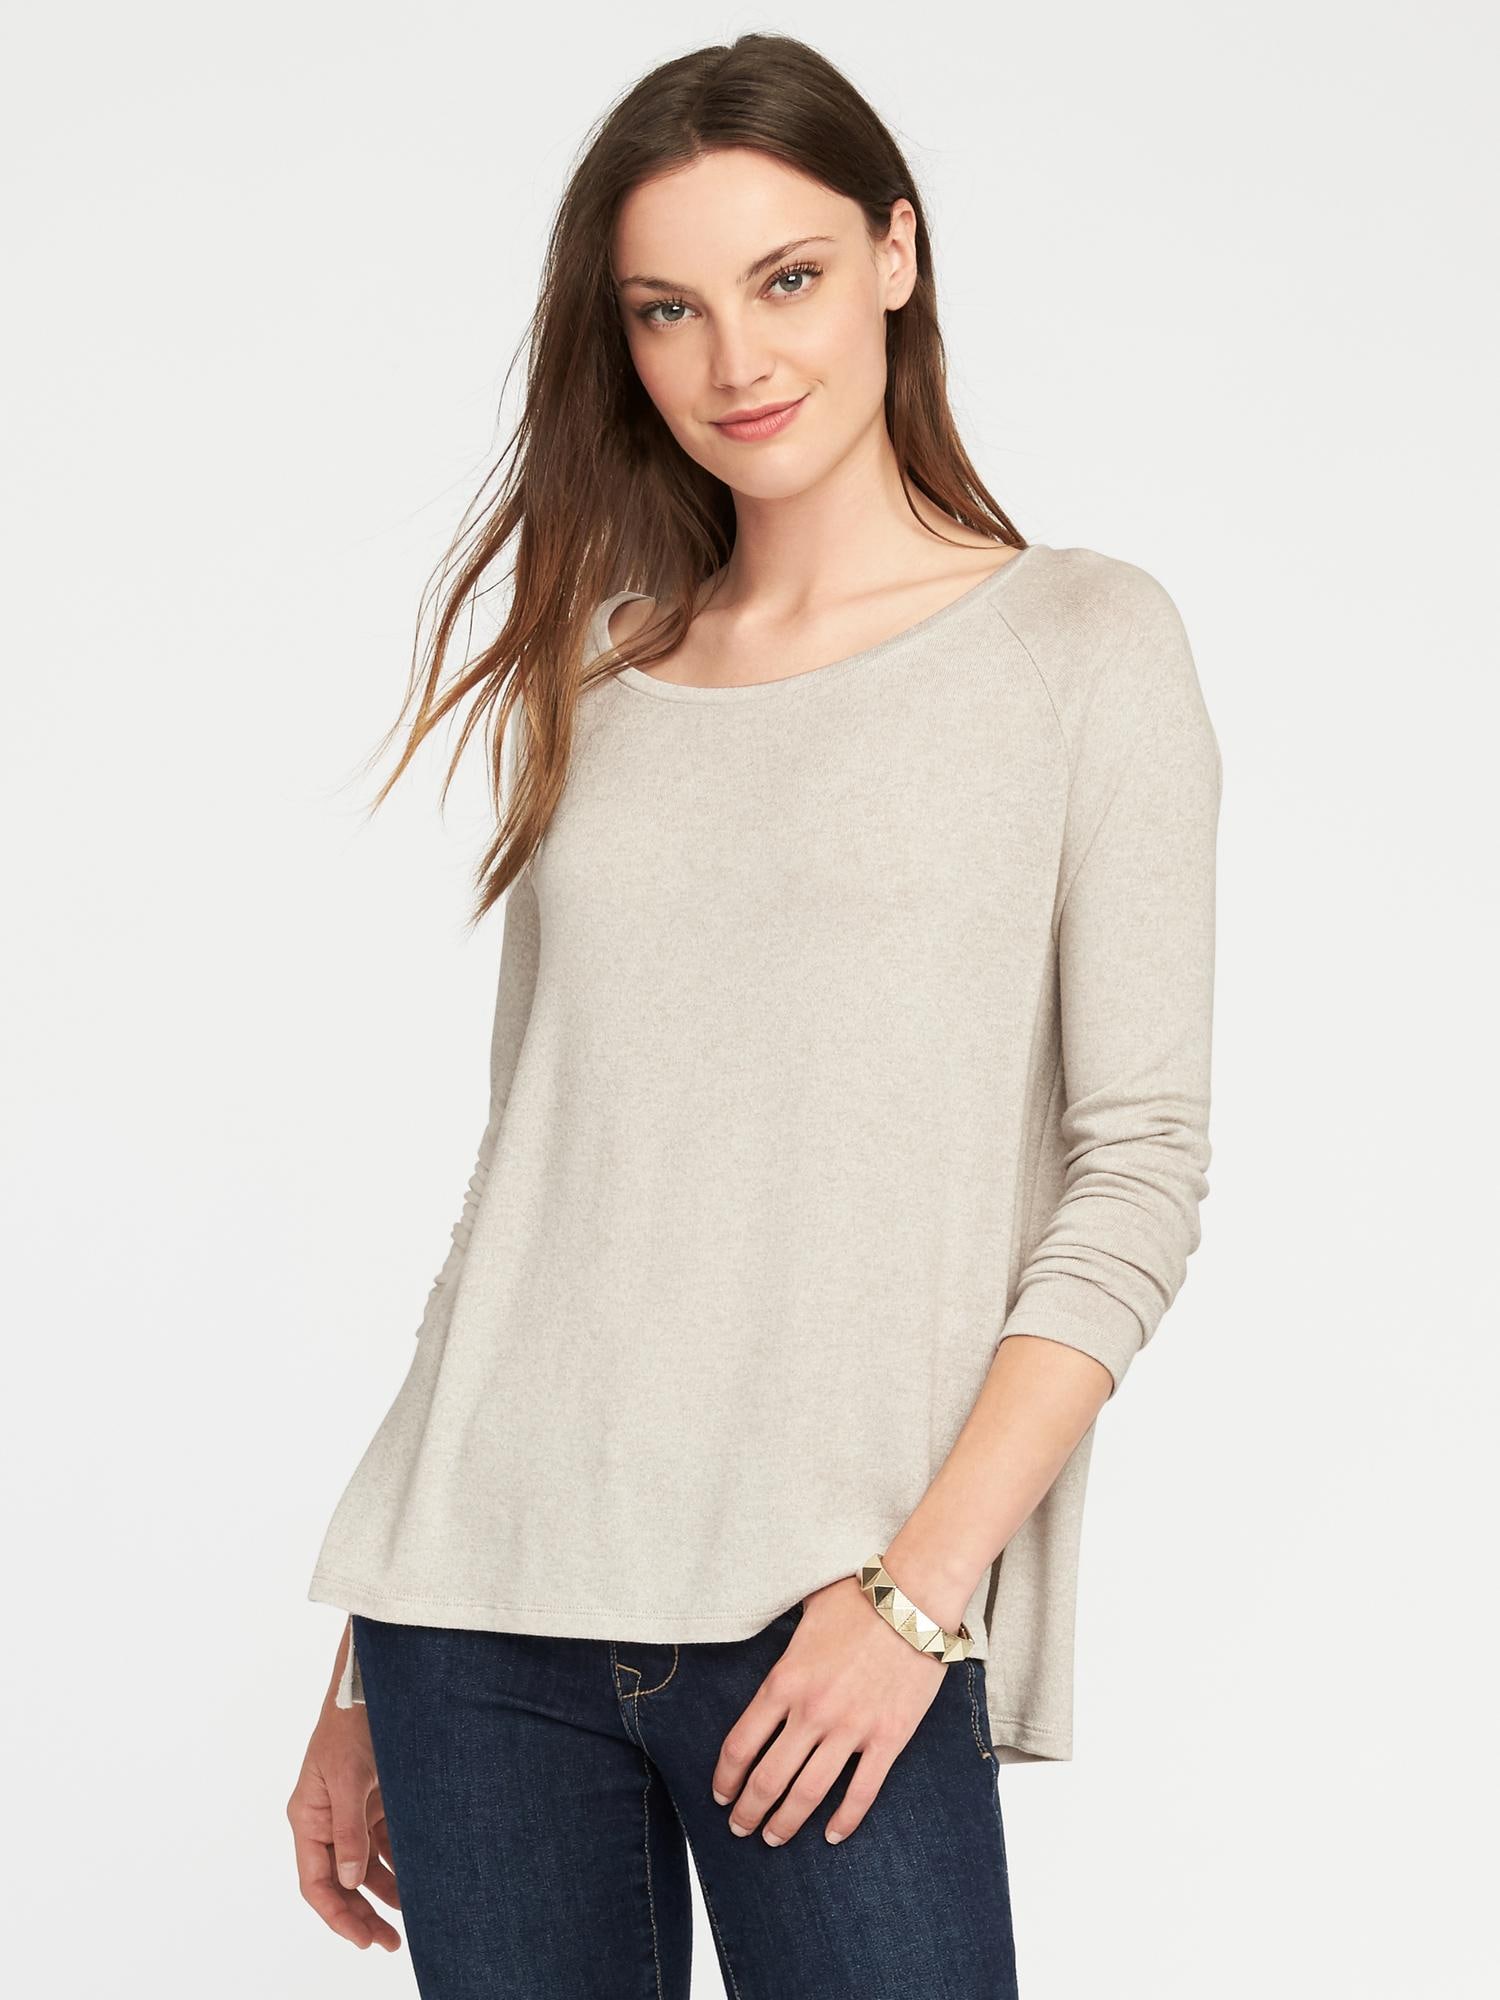 Loose Soft-Spun Scoop-Neck Tee for Women | Old Navy